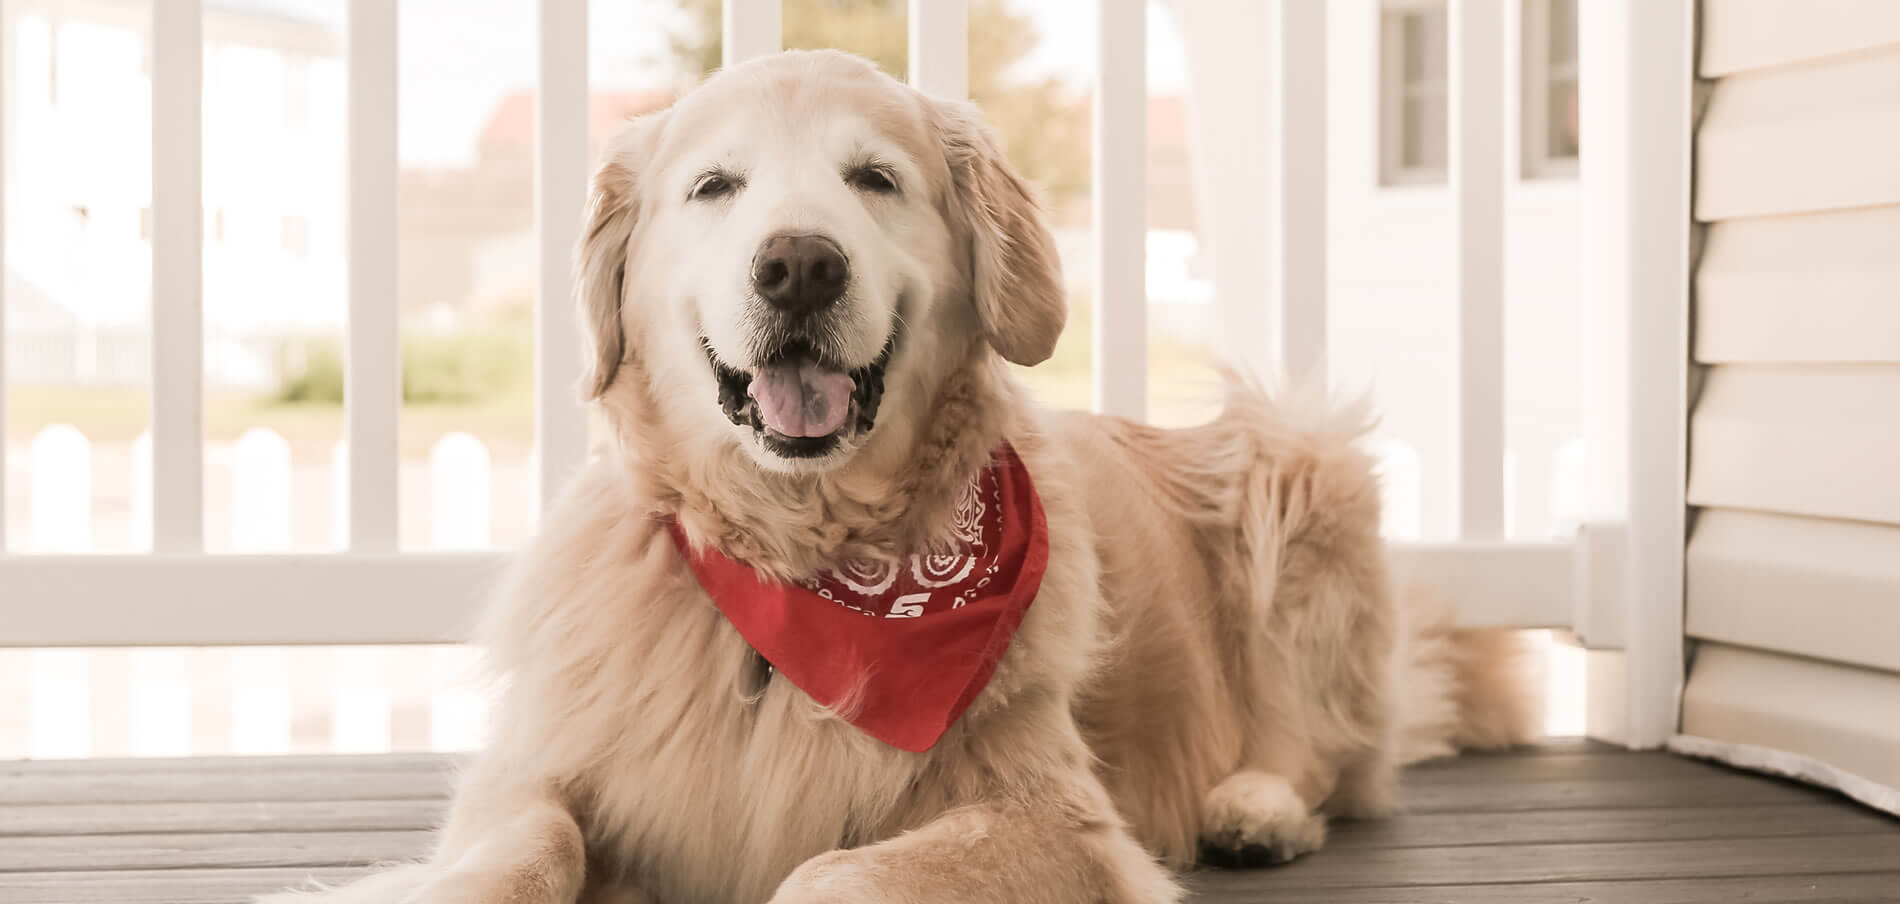 Happy Golden Retriever with Red Bandana sitting on porch